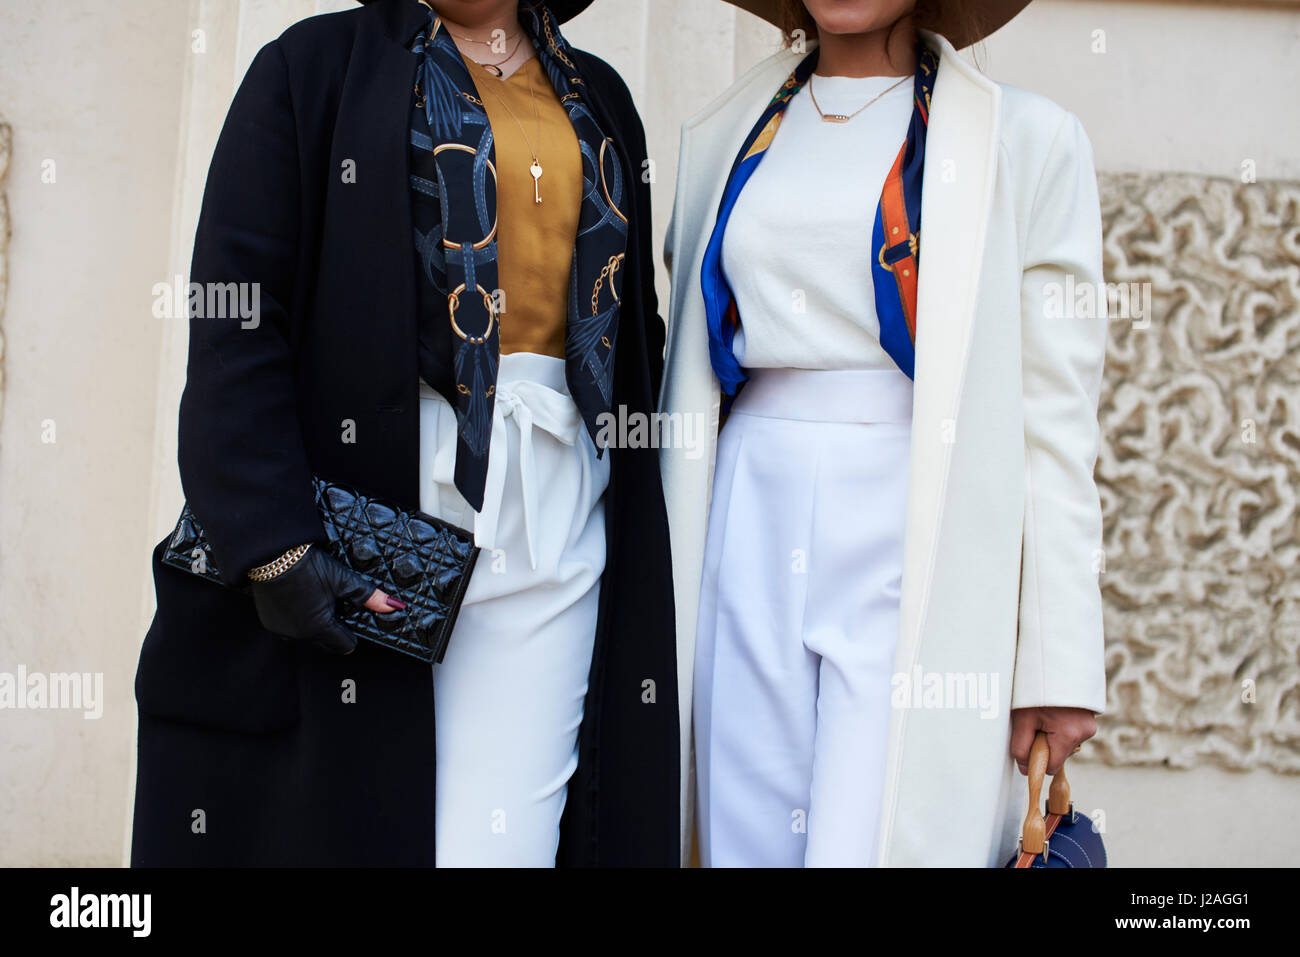 LONDON - FEBRUARY, 2017: Mid section of two women in the street holding handbags, a Chanel clutch bag on the left, while woman on the right wears a Chopard belt, during London Fashion Week, horizontal, front view Stock Photo